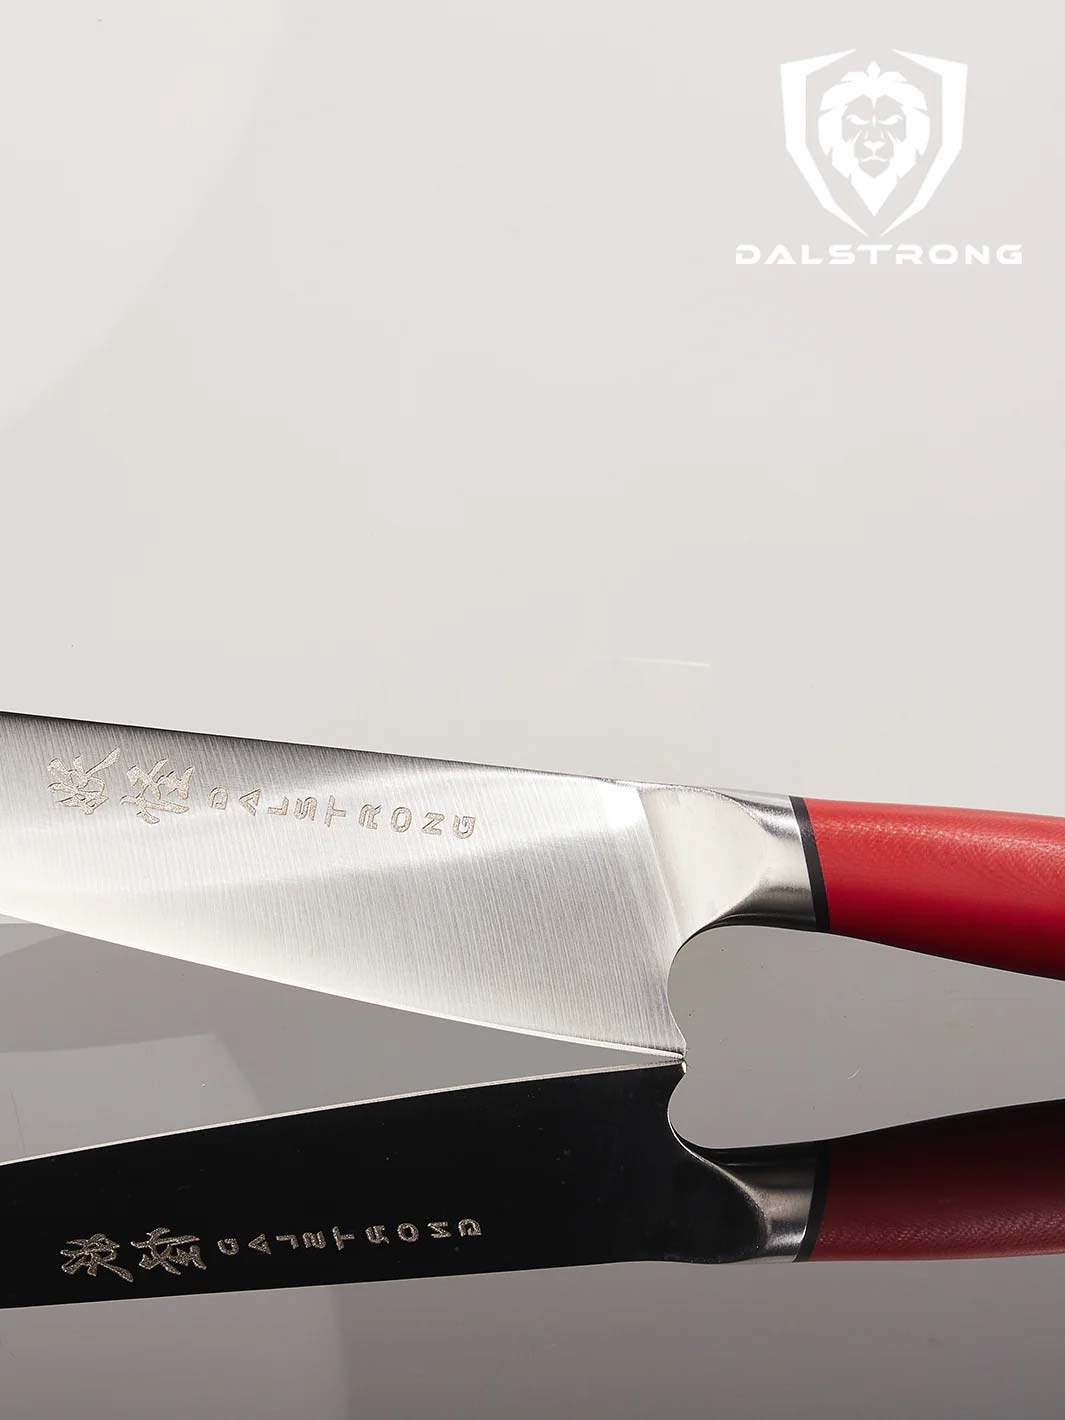 Dalstrong phantom series 8 inch chef knife with red handle featuring it's japanese blade.